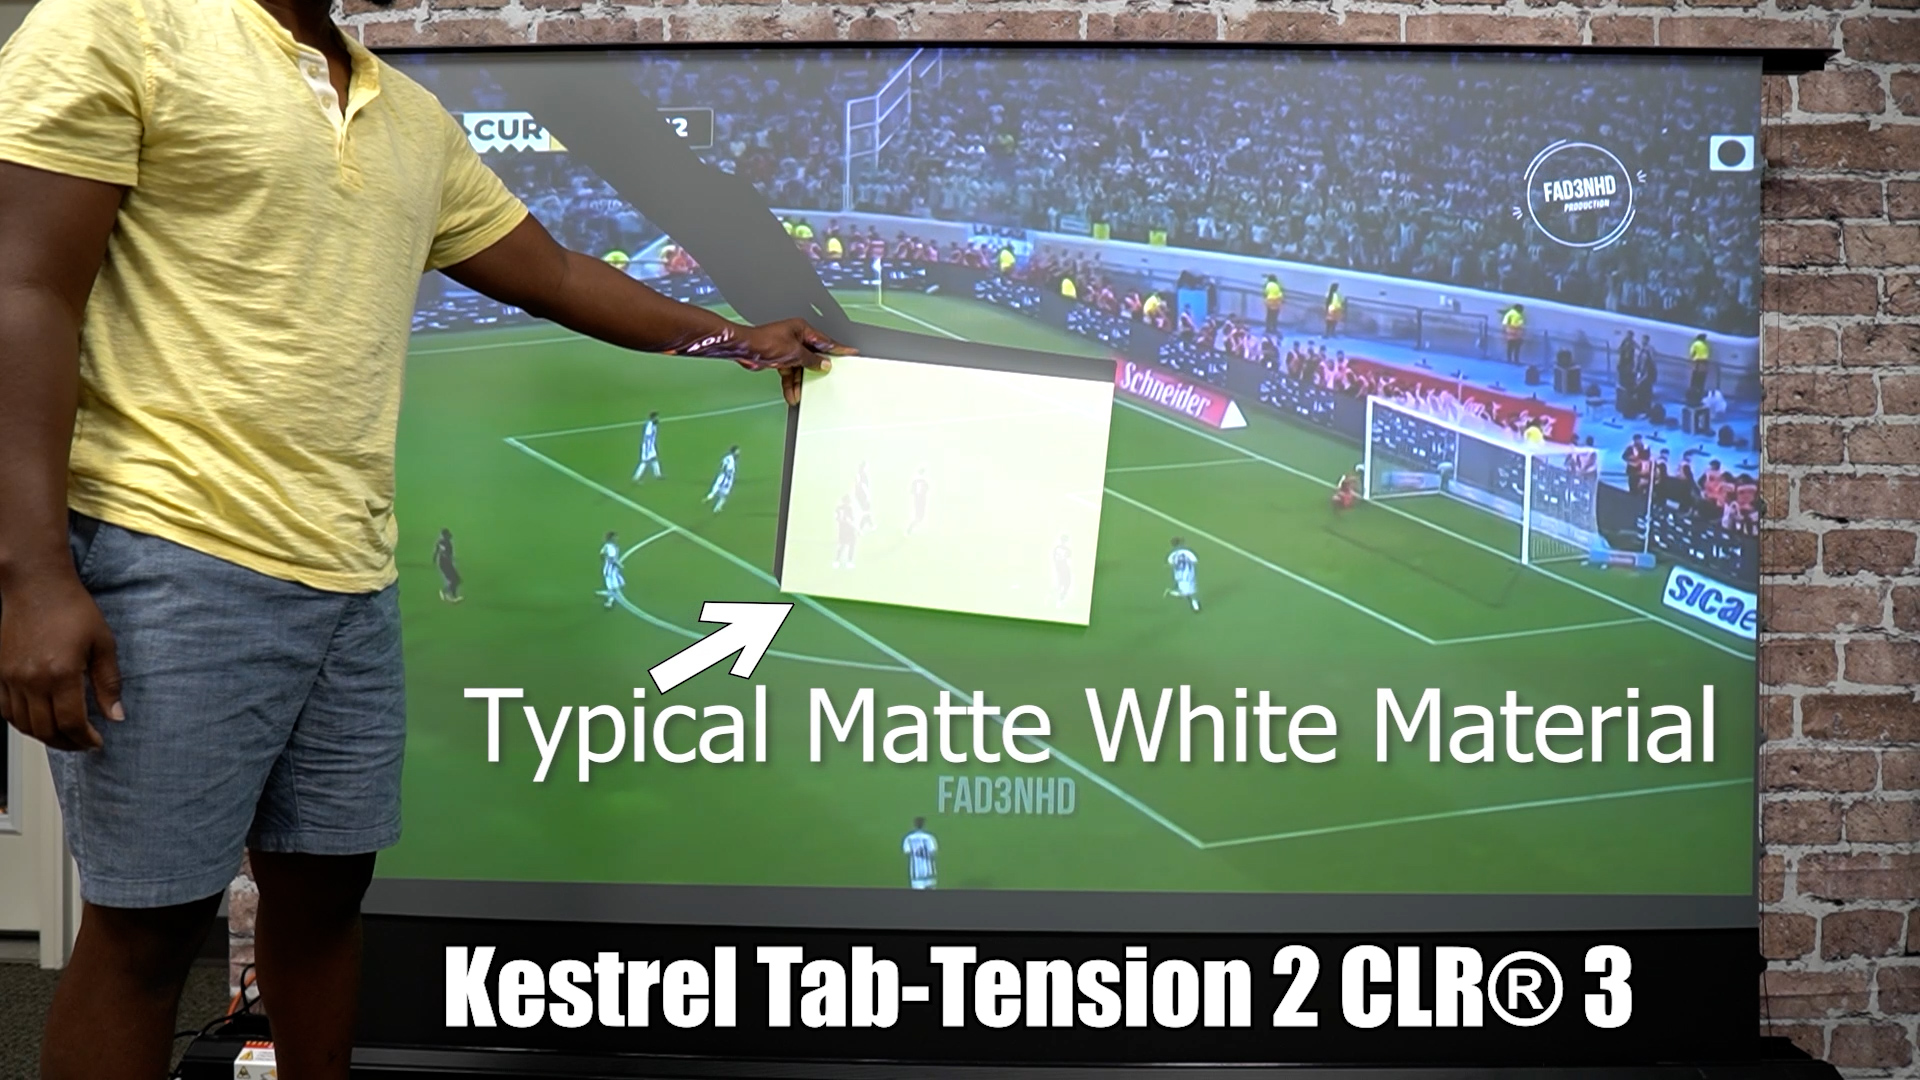 Kestrel Tab Tension 2 CLR® 3 Series: The Perfect Addition to Your Home Theater